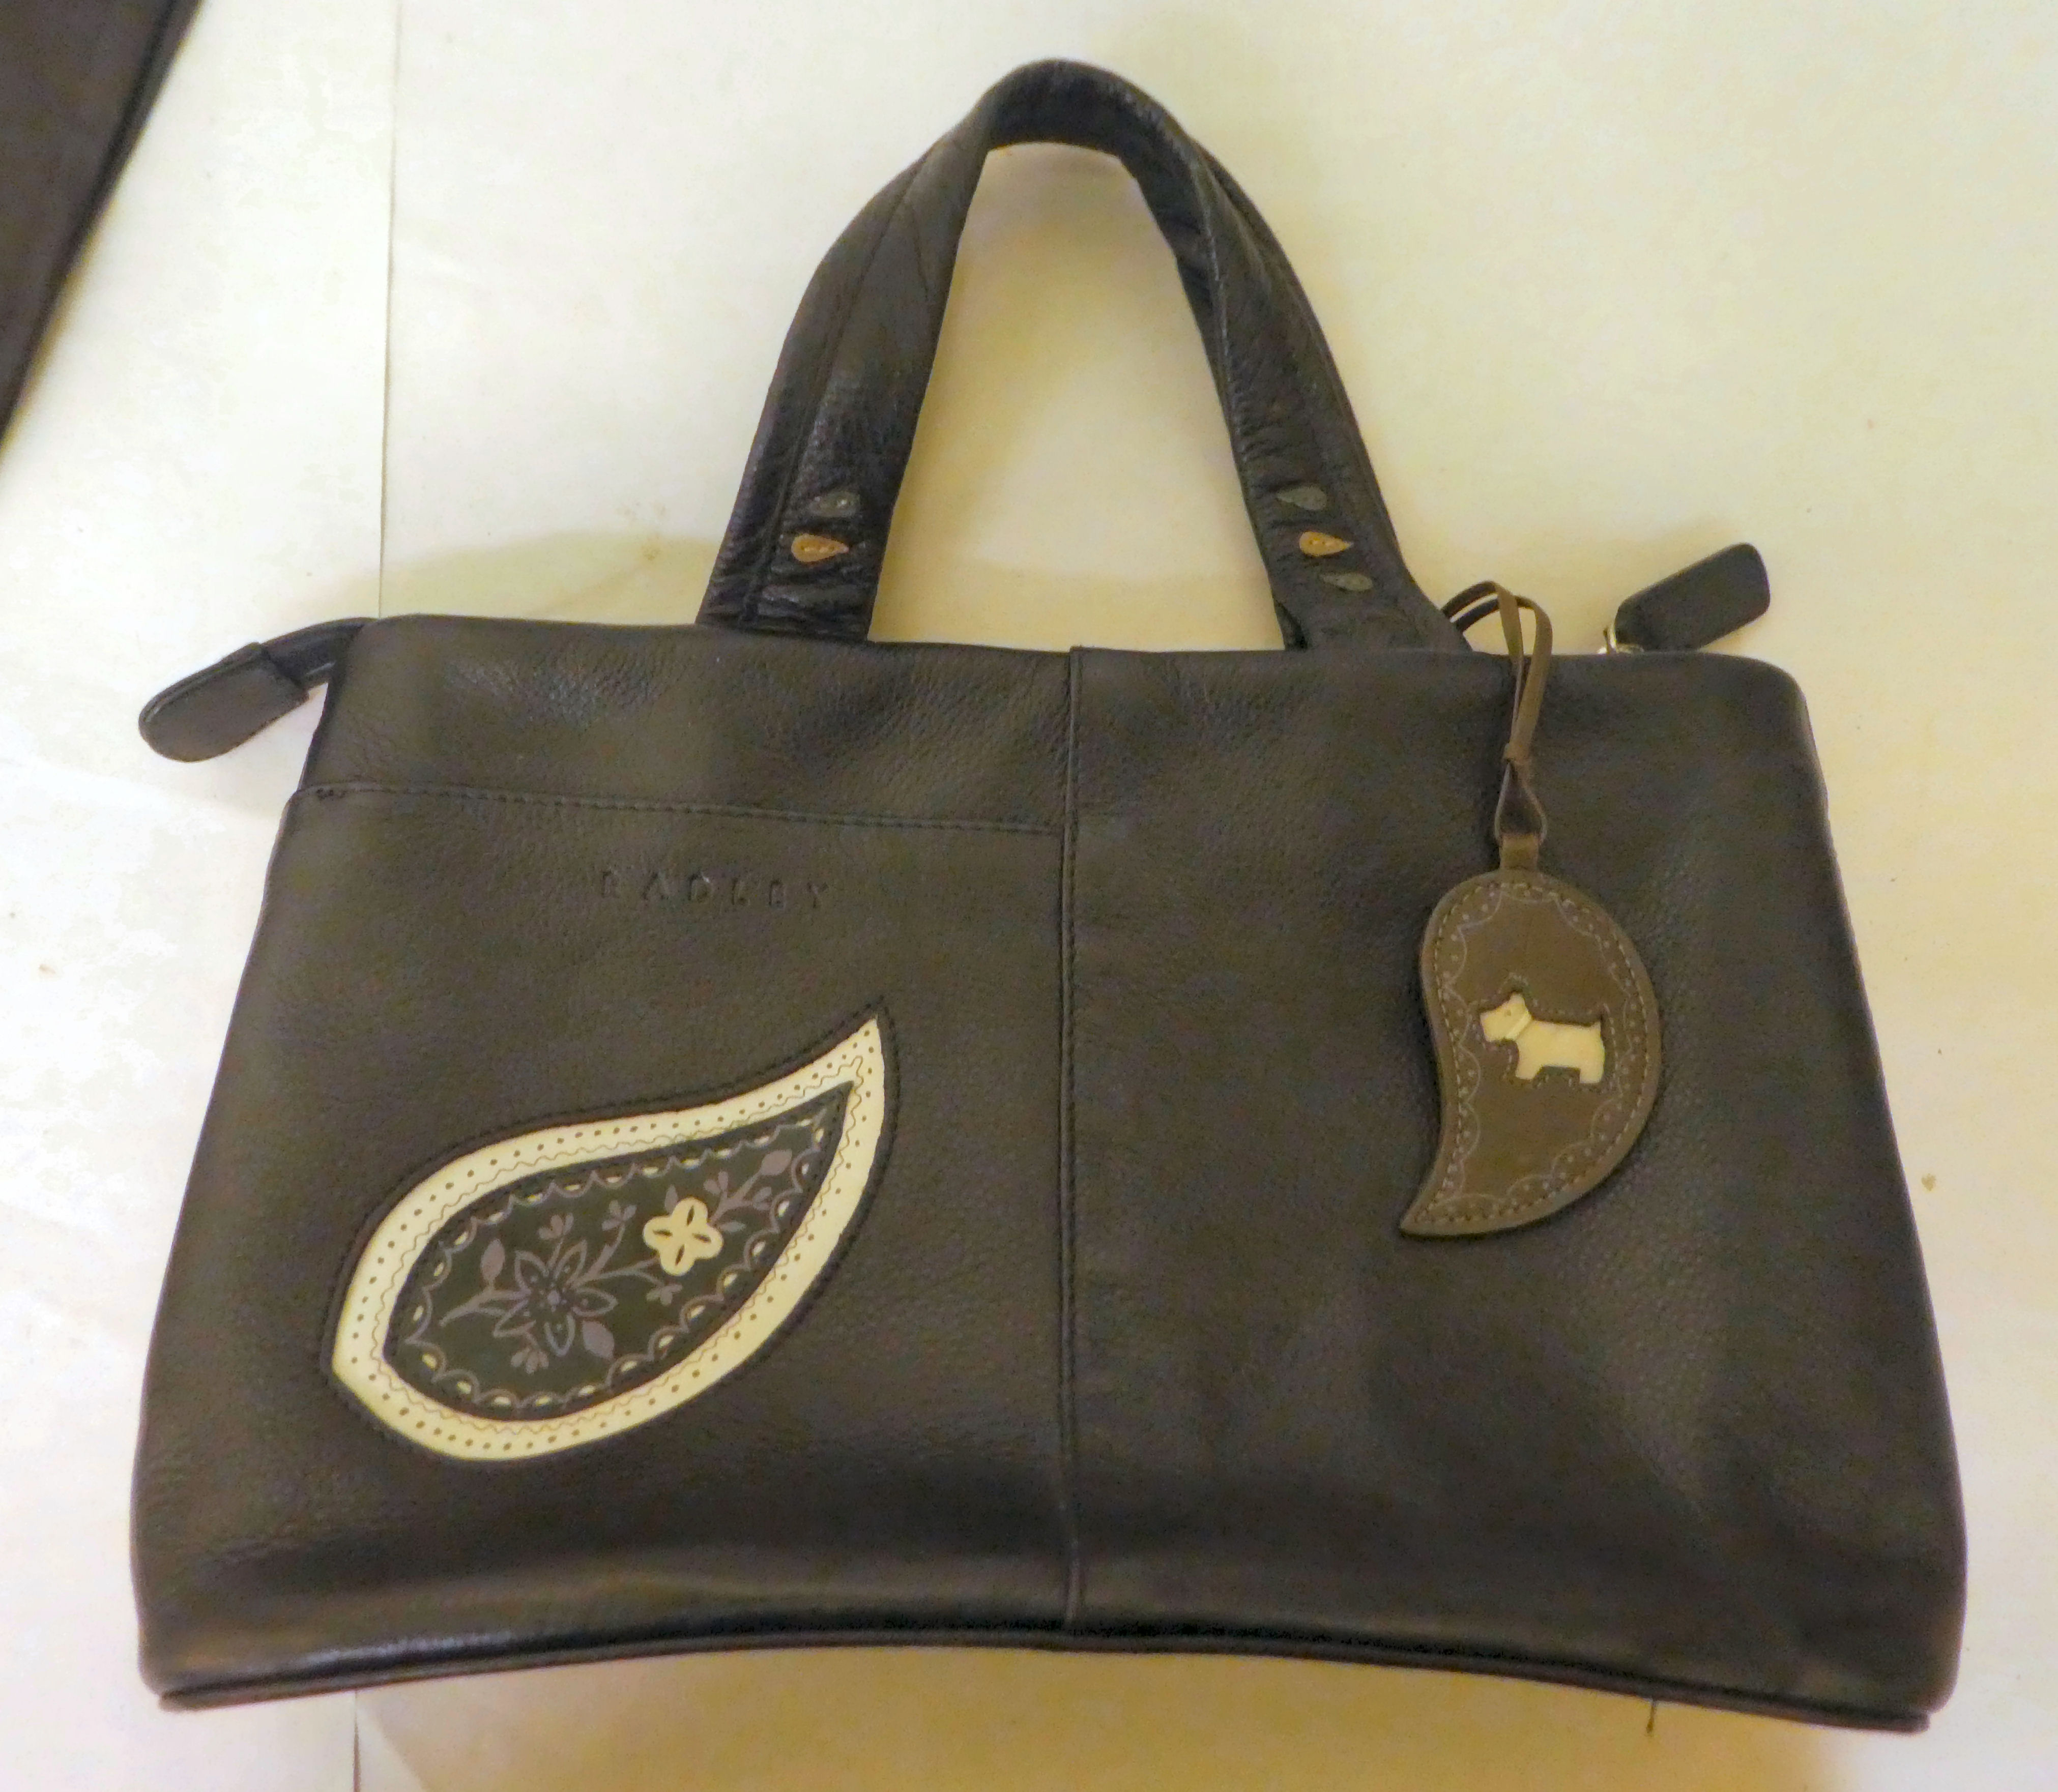 Period lace and ladies fashion accessories: to include a Radley handbag